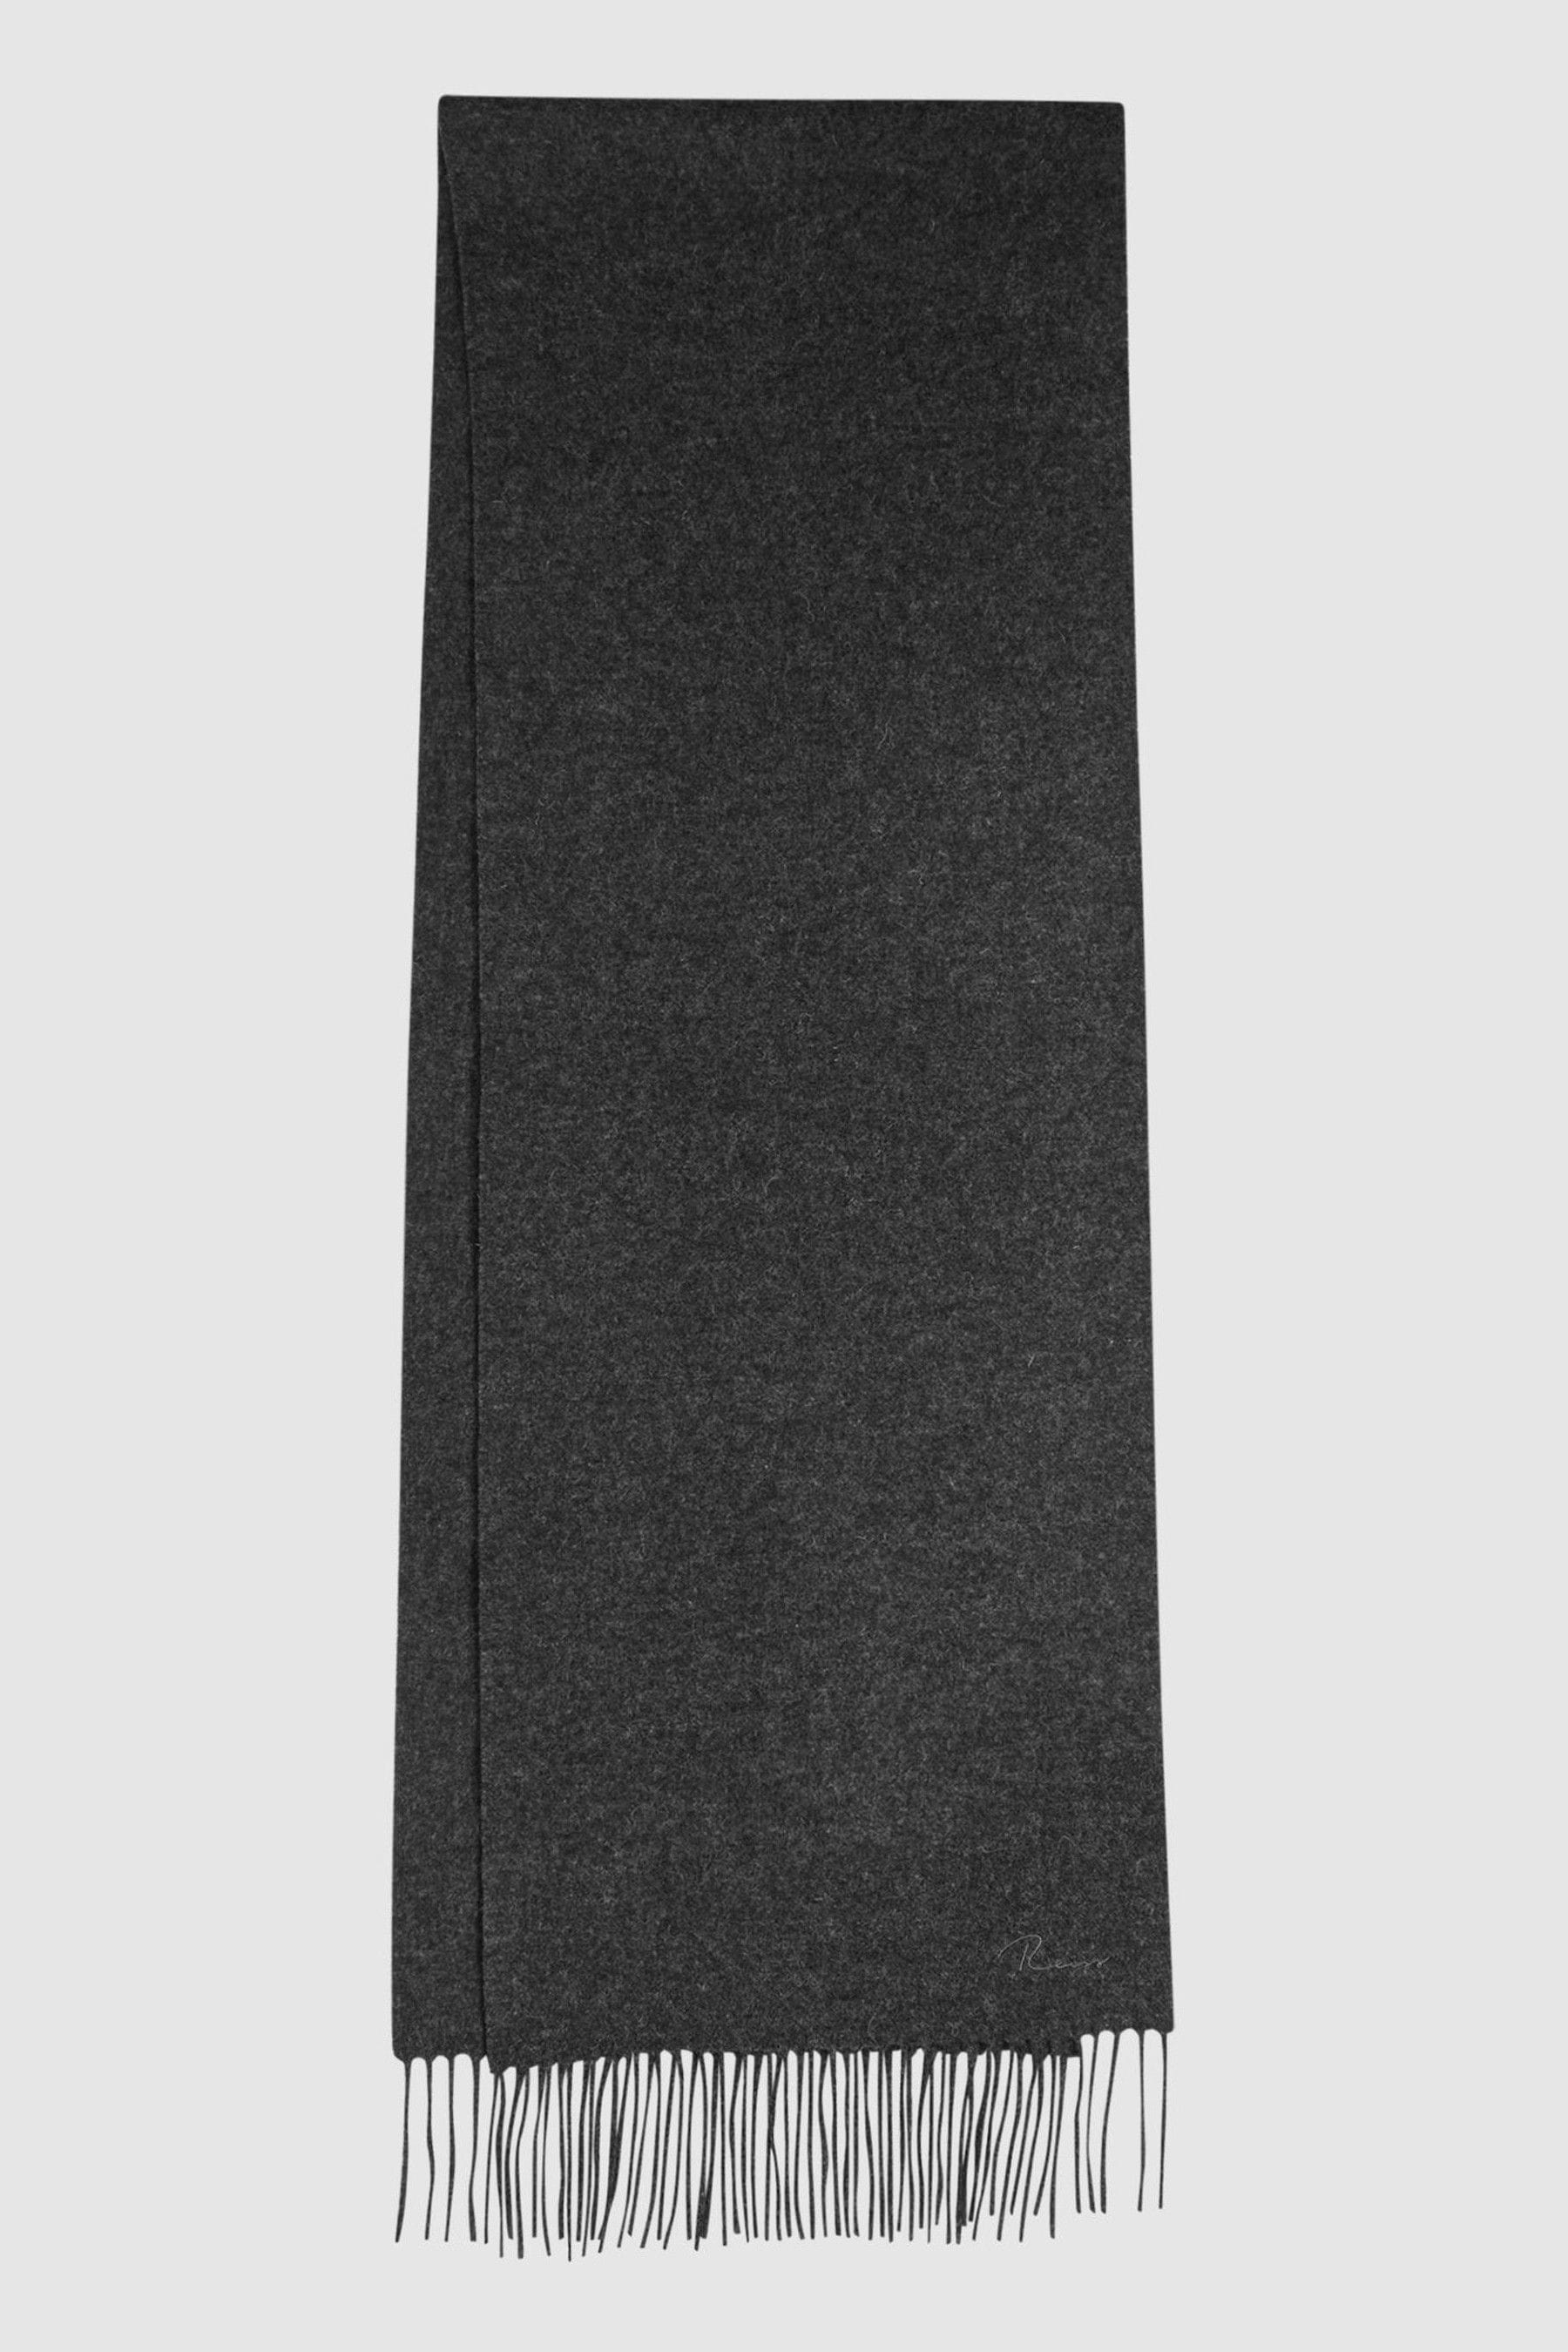 Shop Reiss Picton - Charcoal Picton Cashmere Blend Scarf, One